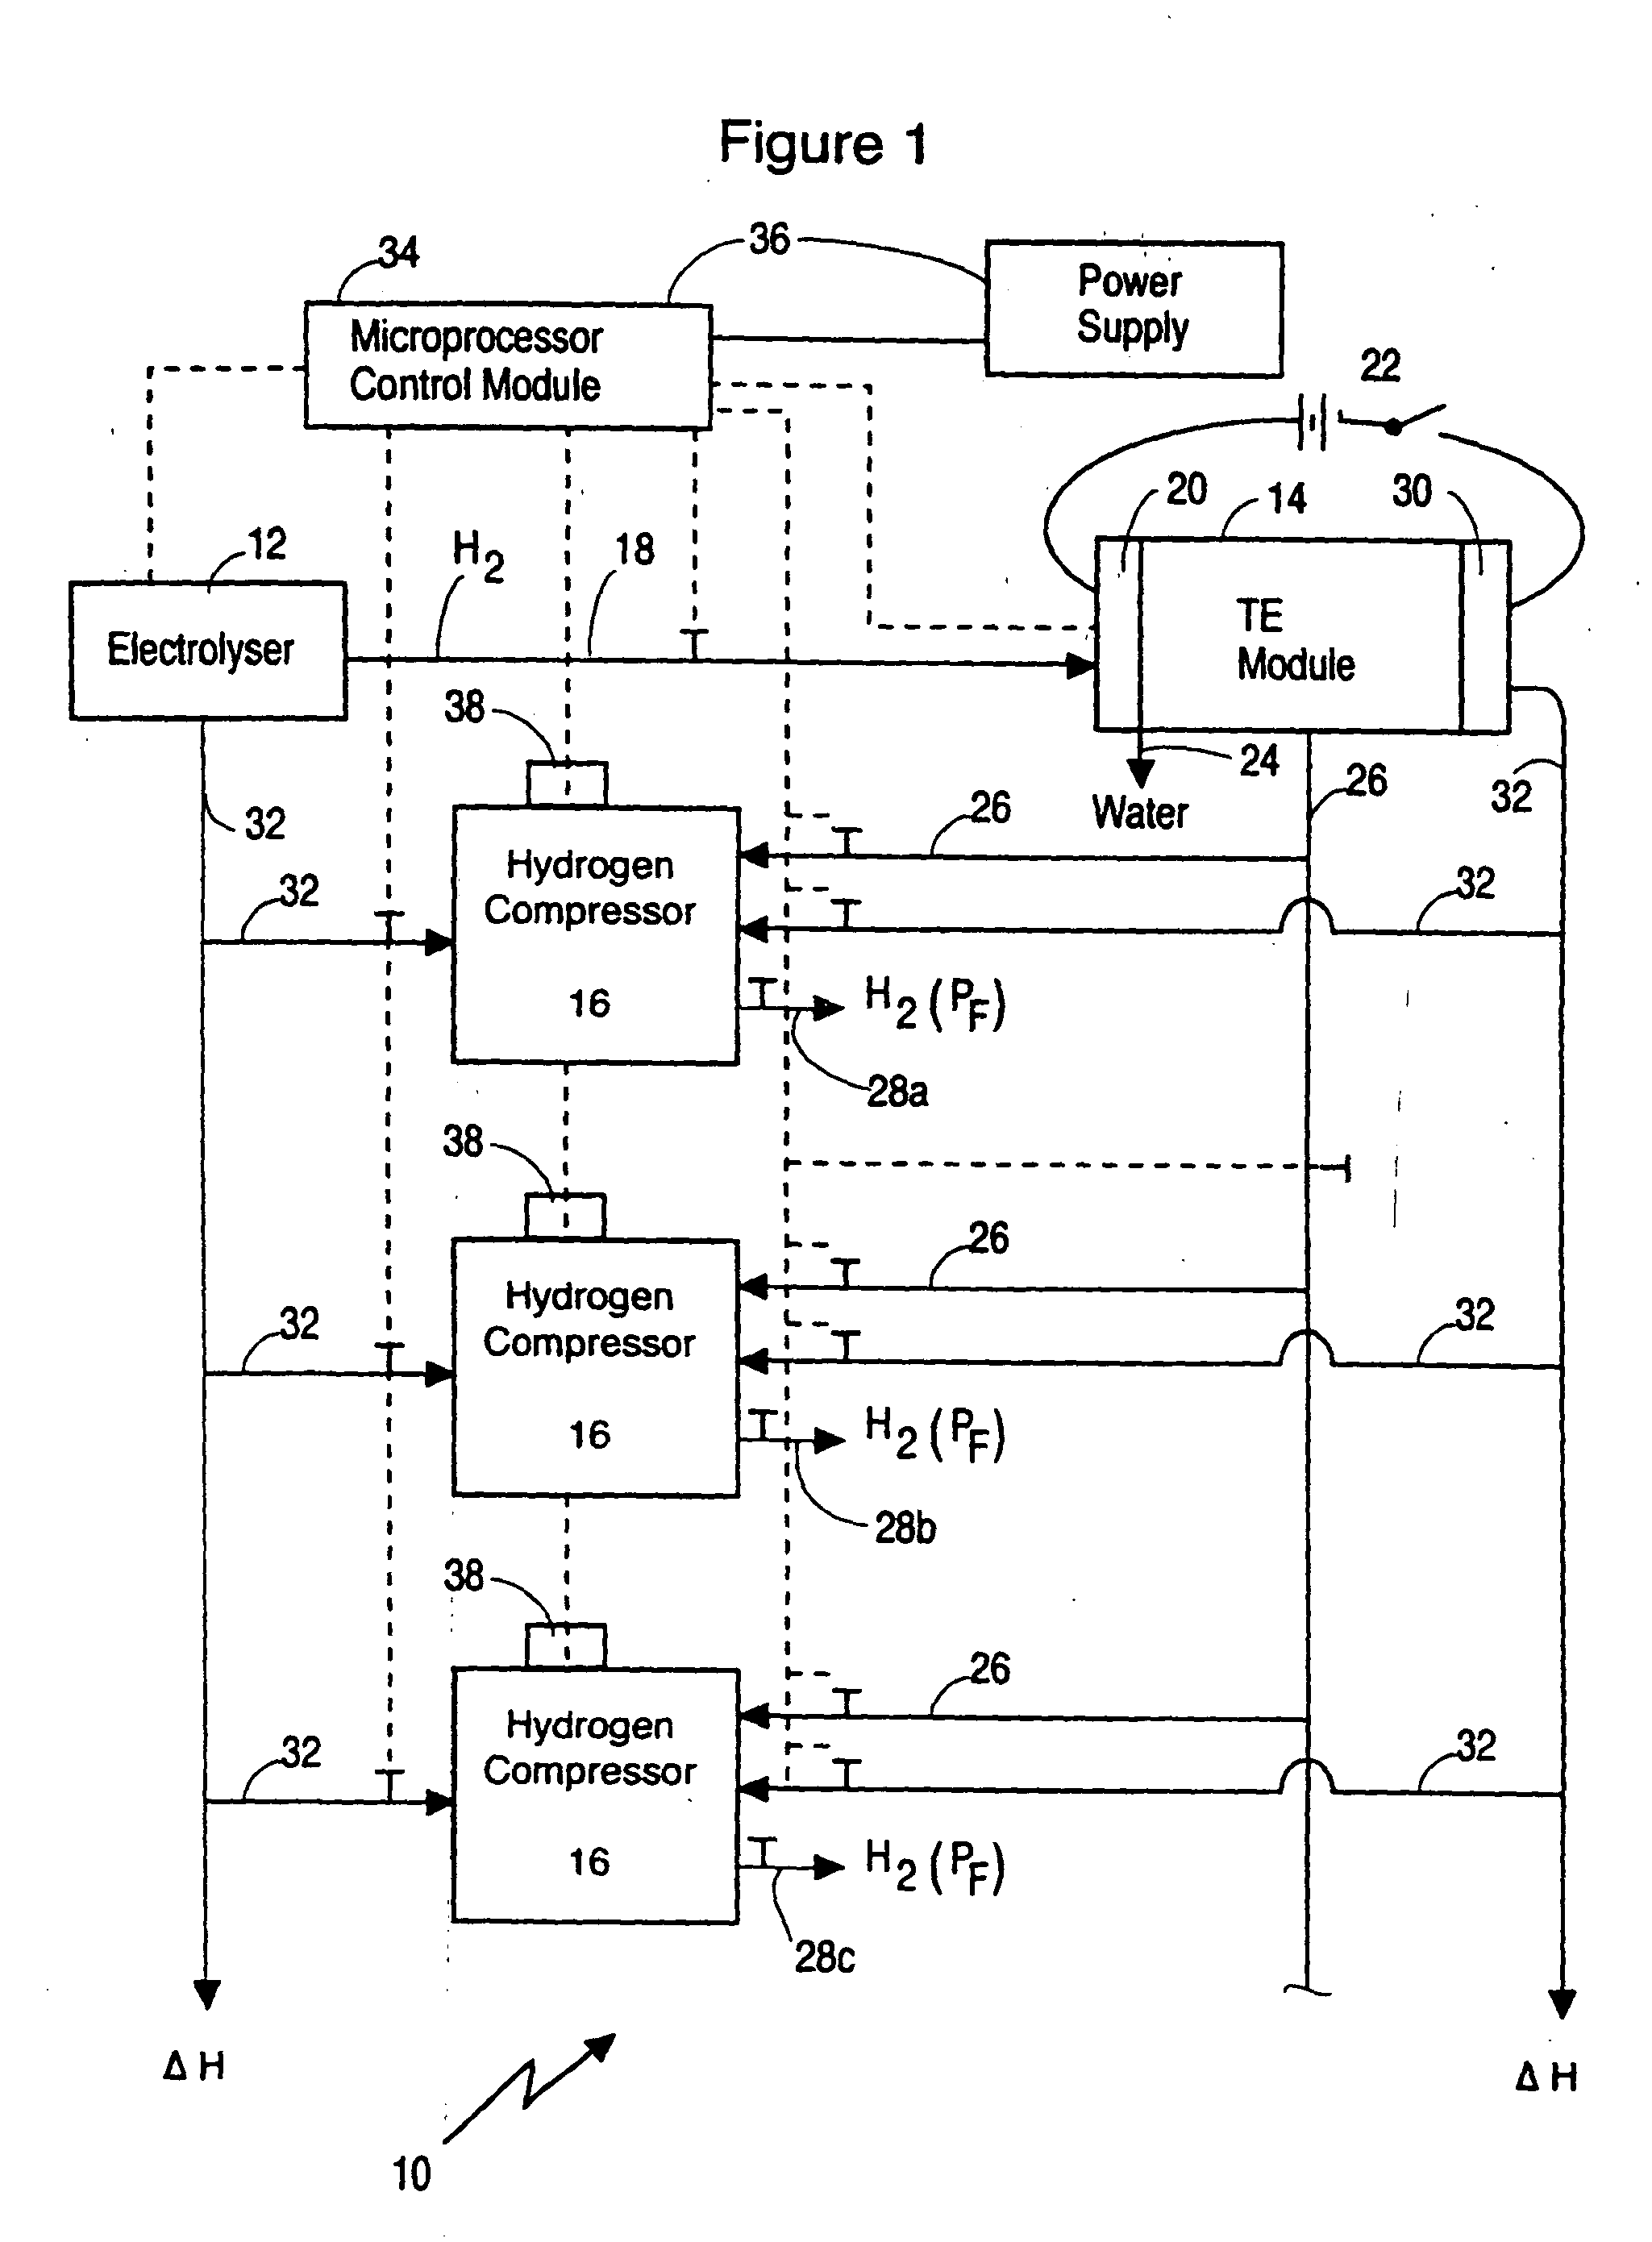 Method and apparatus for providing pressurized hydrogen gas